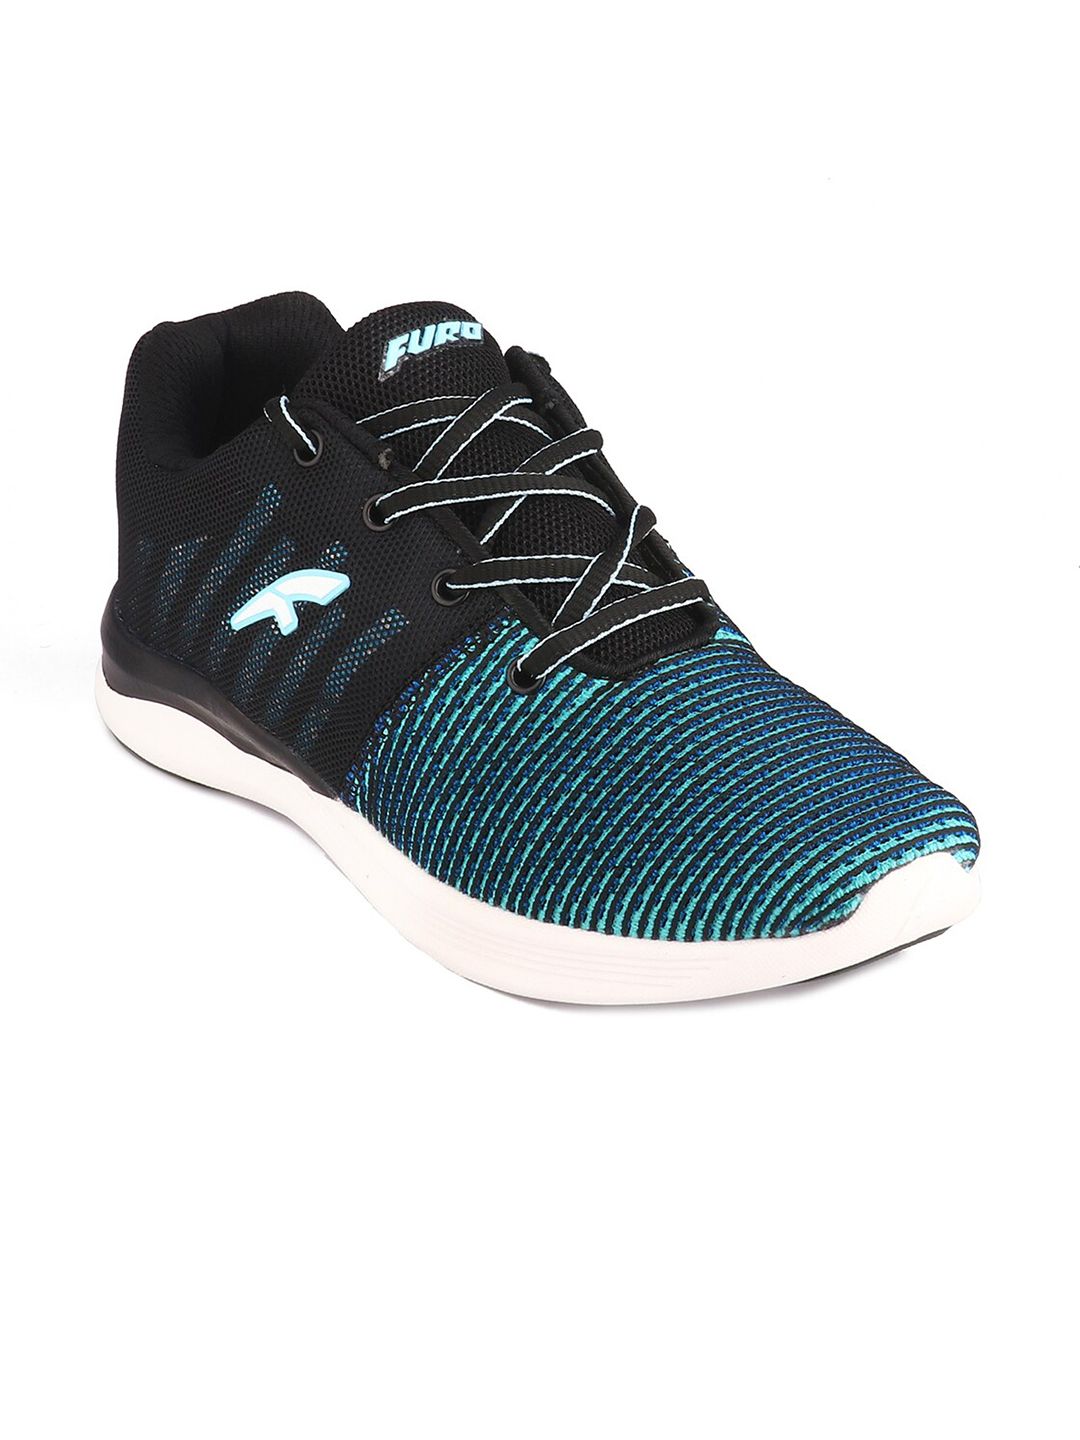 FURO by Red Chief Women Black & Blue Mesh Running Shoes Price in India